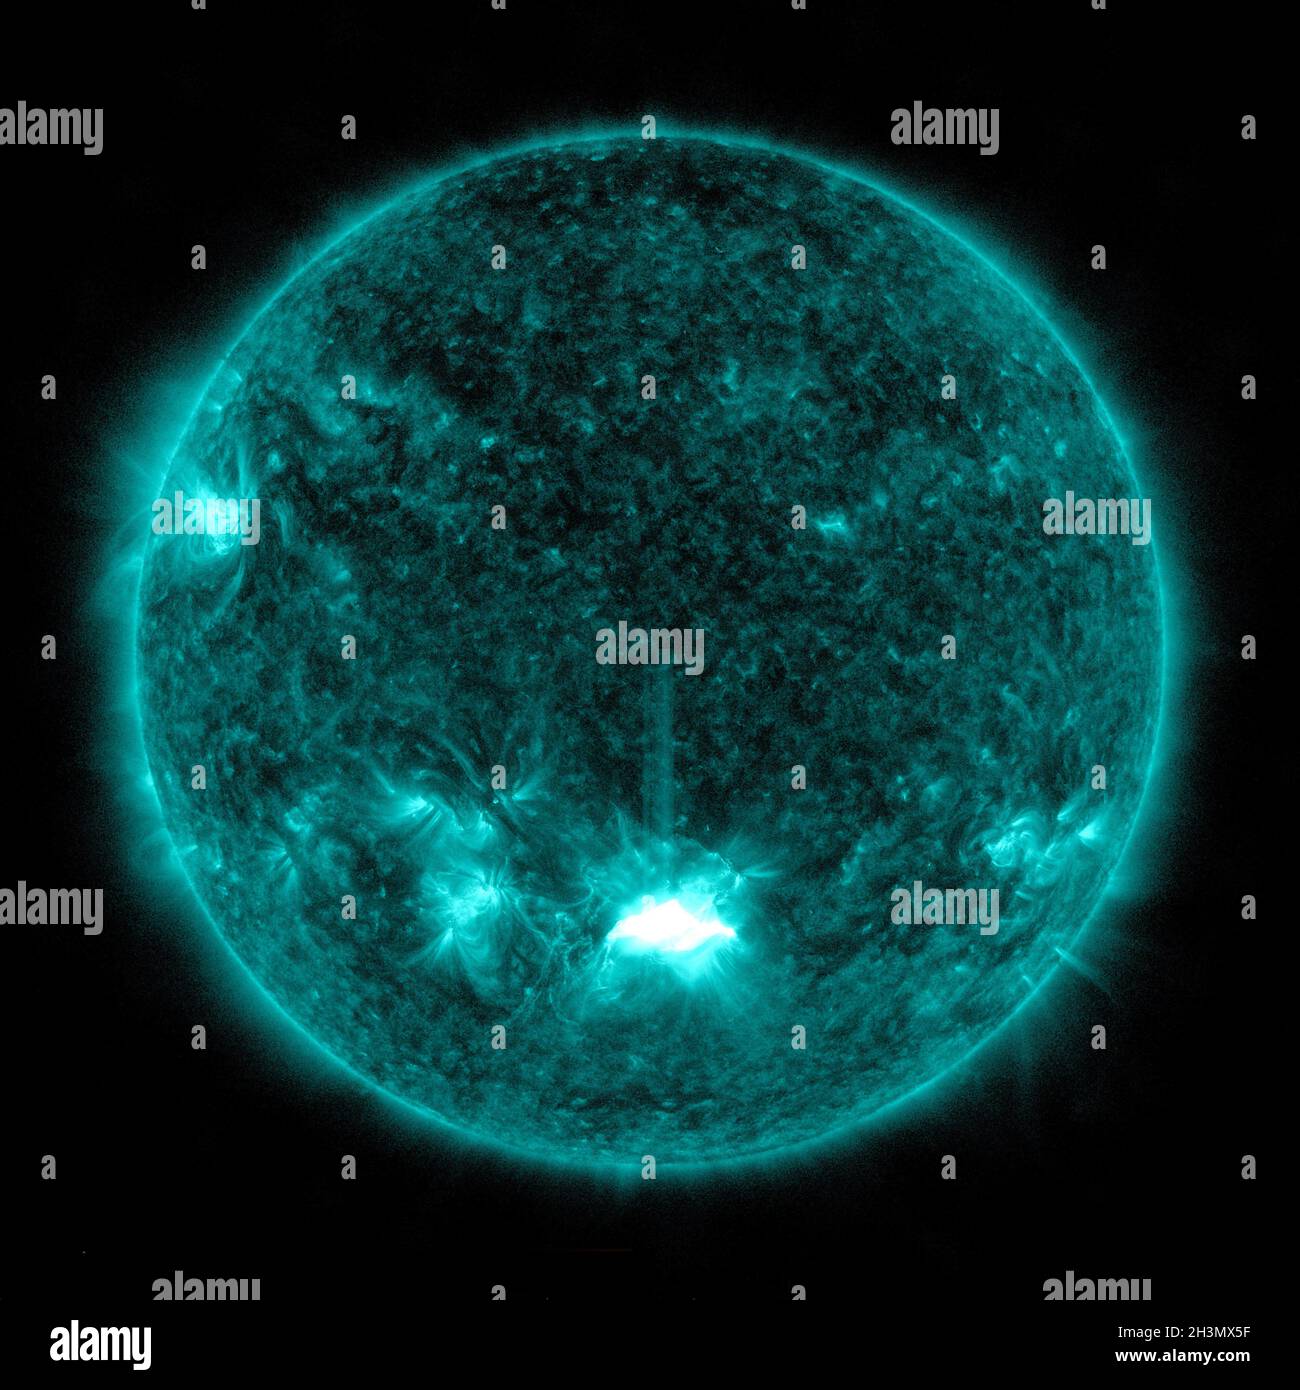 NASA's Solar Dynamics Observatory captured this image of a solar flare, as seen in the bright flash at the Sun's lower center, on October 28, 2021. The image shows a subset of extreme ultraviolet light that highlights the extremely hot material in flares and which is colorized here in teal. Solar flares are powerful bursts of radiation. Harmful radiation from a flare cannot pass through Earth's atmosphere to physically affect humans on the ground; however, when intense enough, they can disturb the atmosphere in the layer where GPS and communications signals travel. NASA/UPI Stock Photo